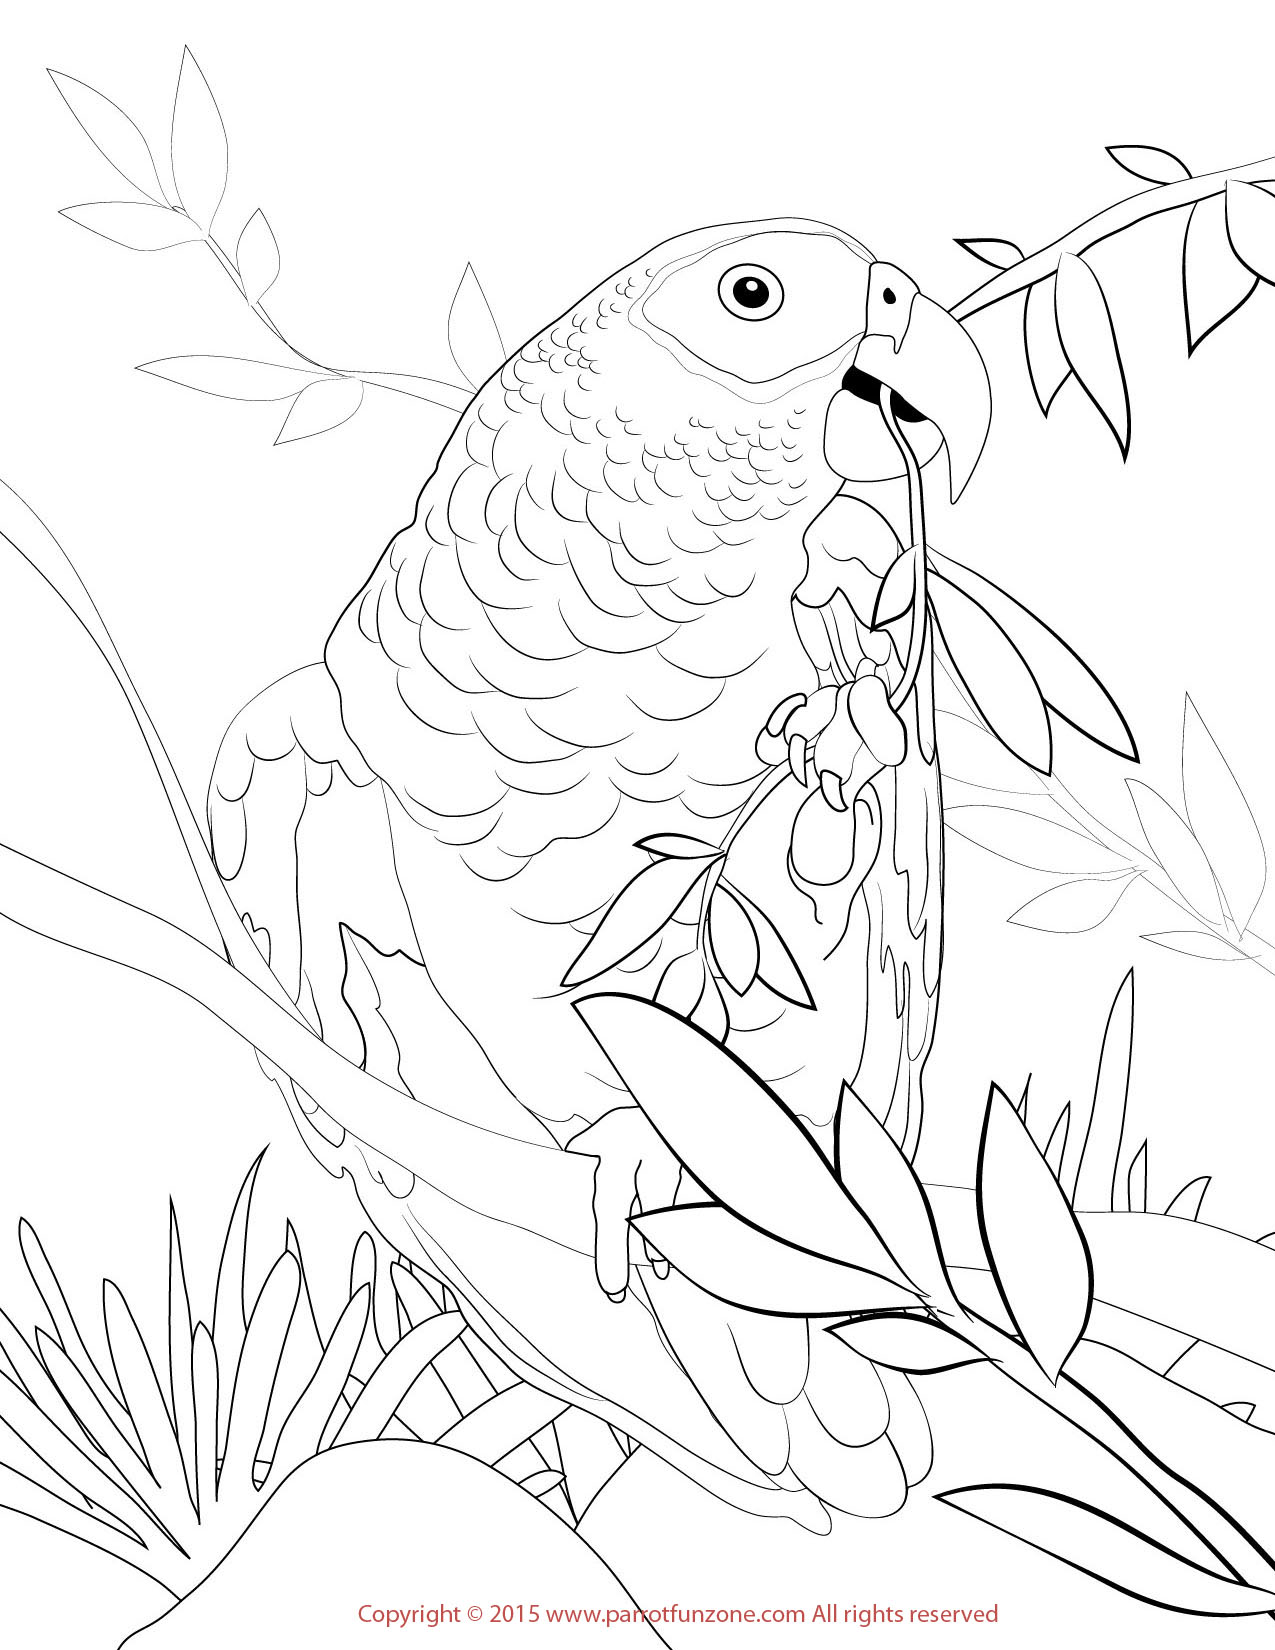 African Parrot coloring #2, Download drawings